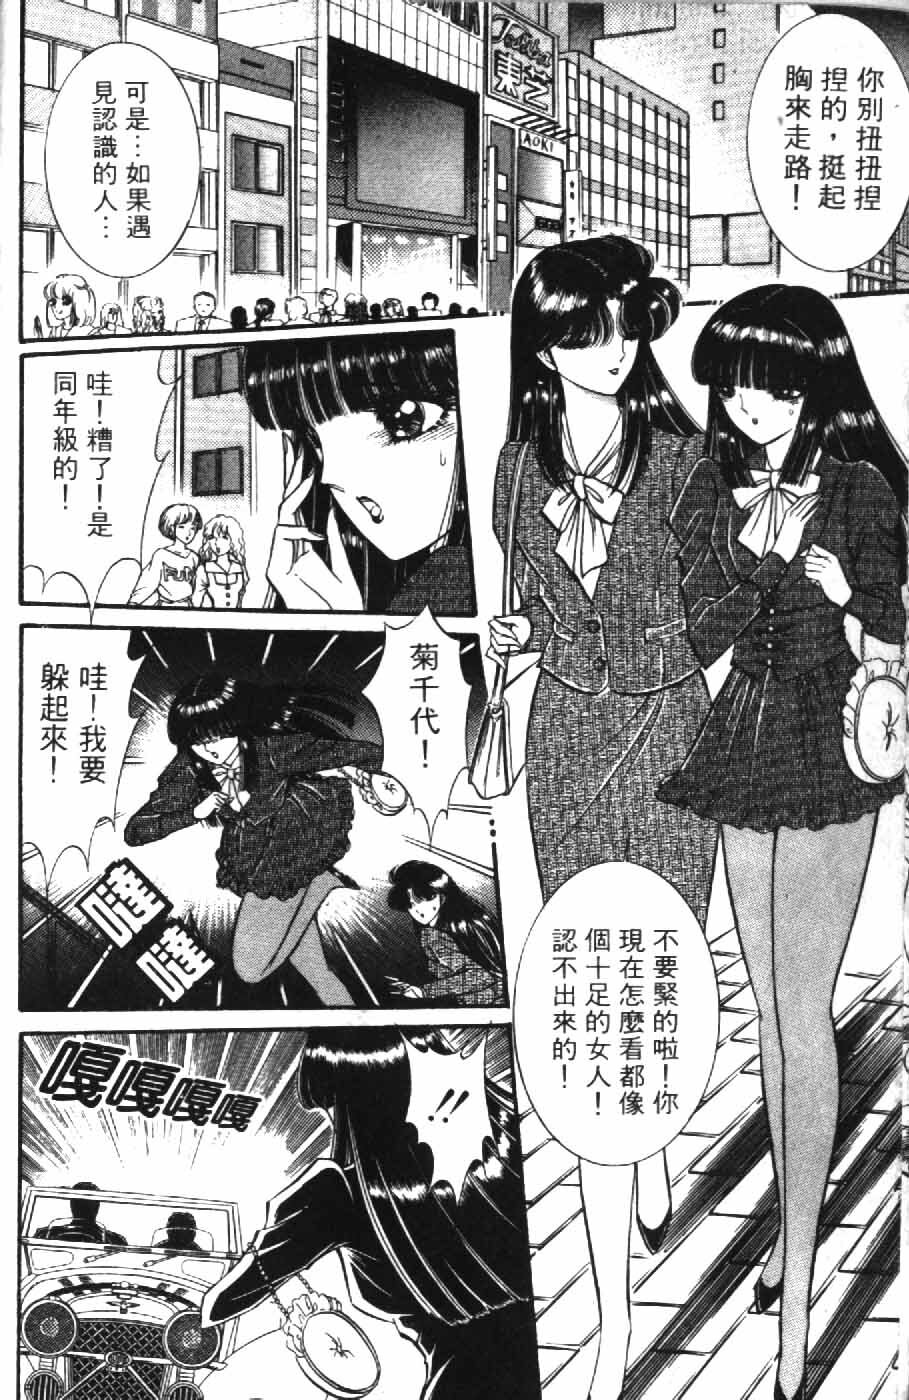 [Senno Knife] Ouma ga Horror Show 1 - Trans Sexual Special Show 1 | 顫慄博覽會 1 [Chinese] page 6 full